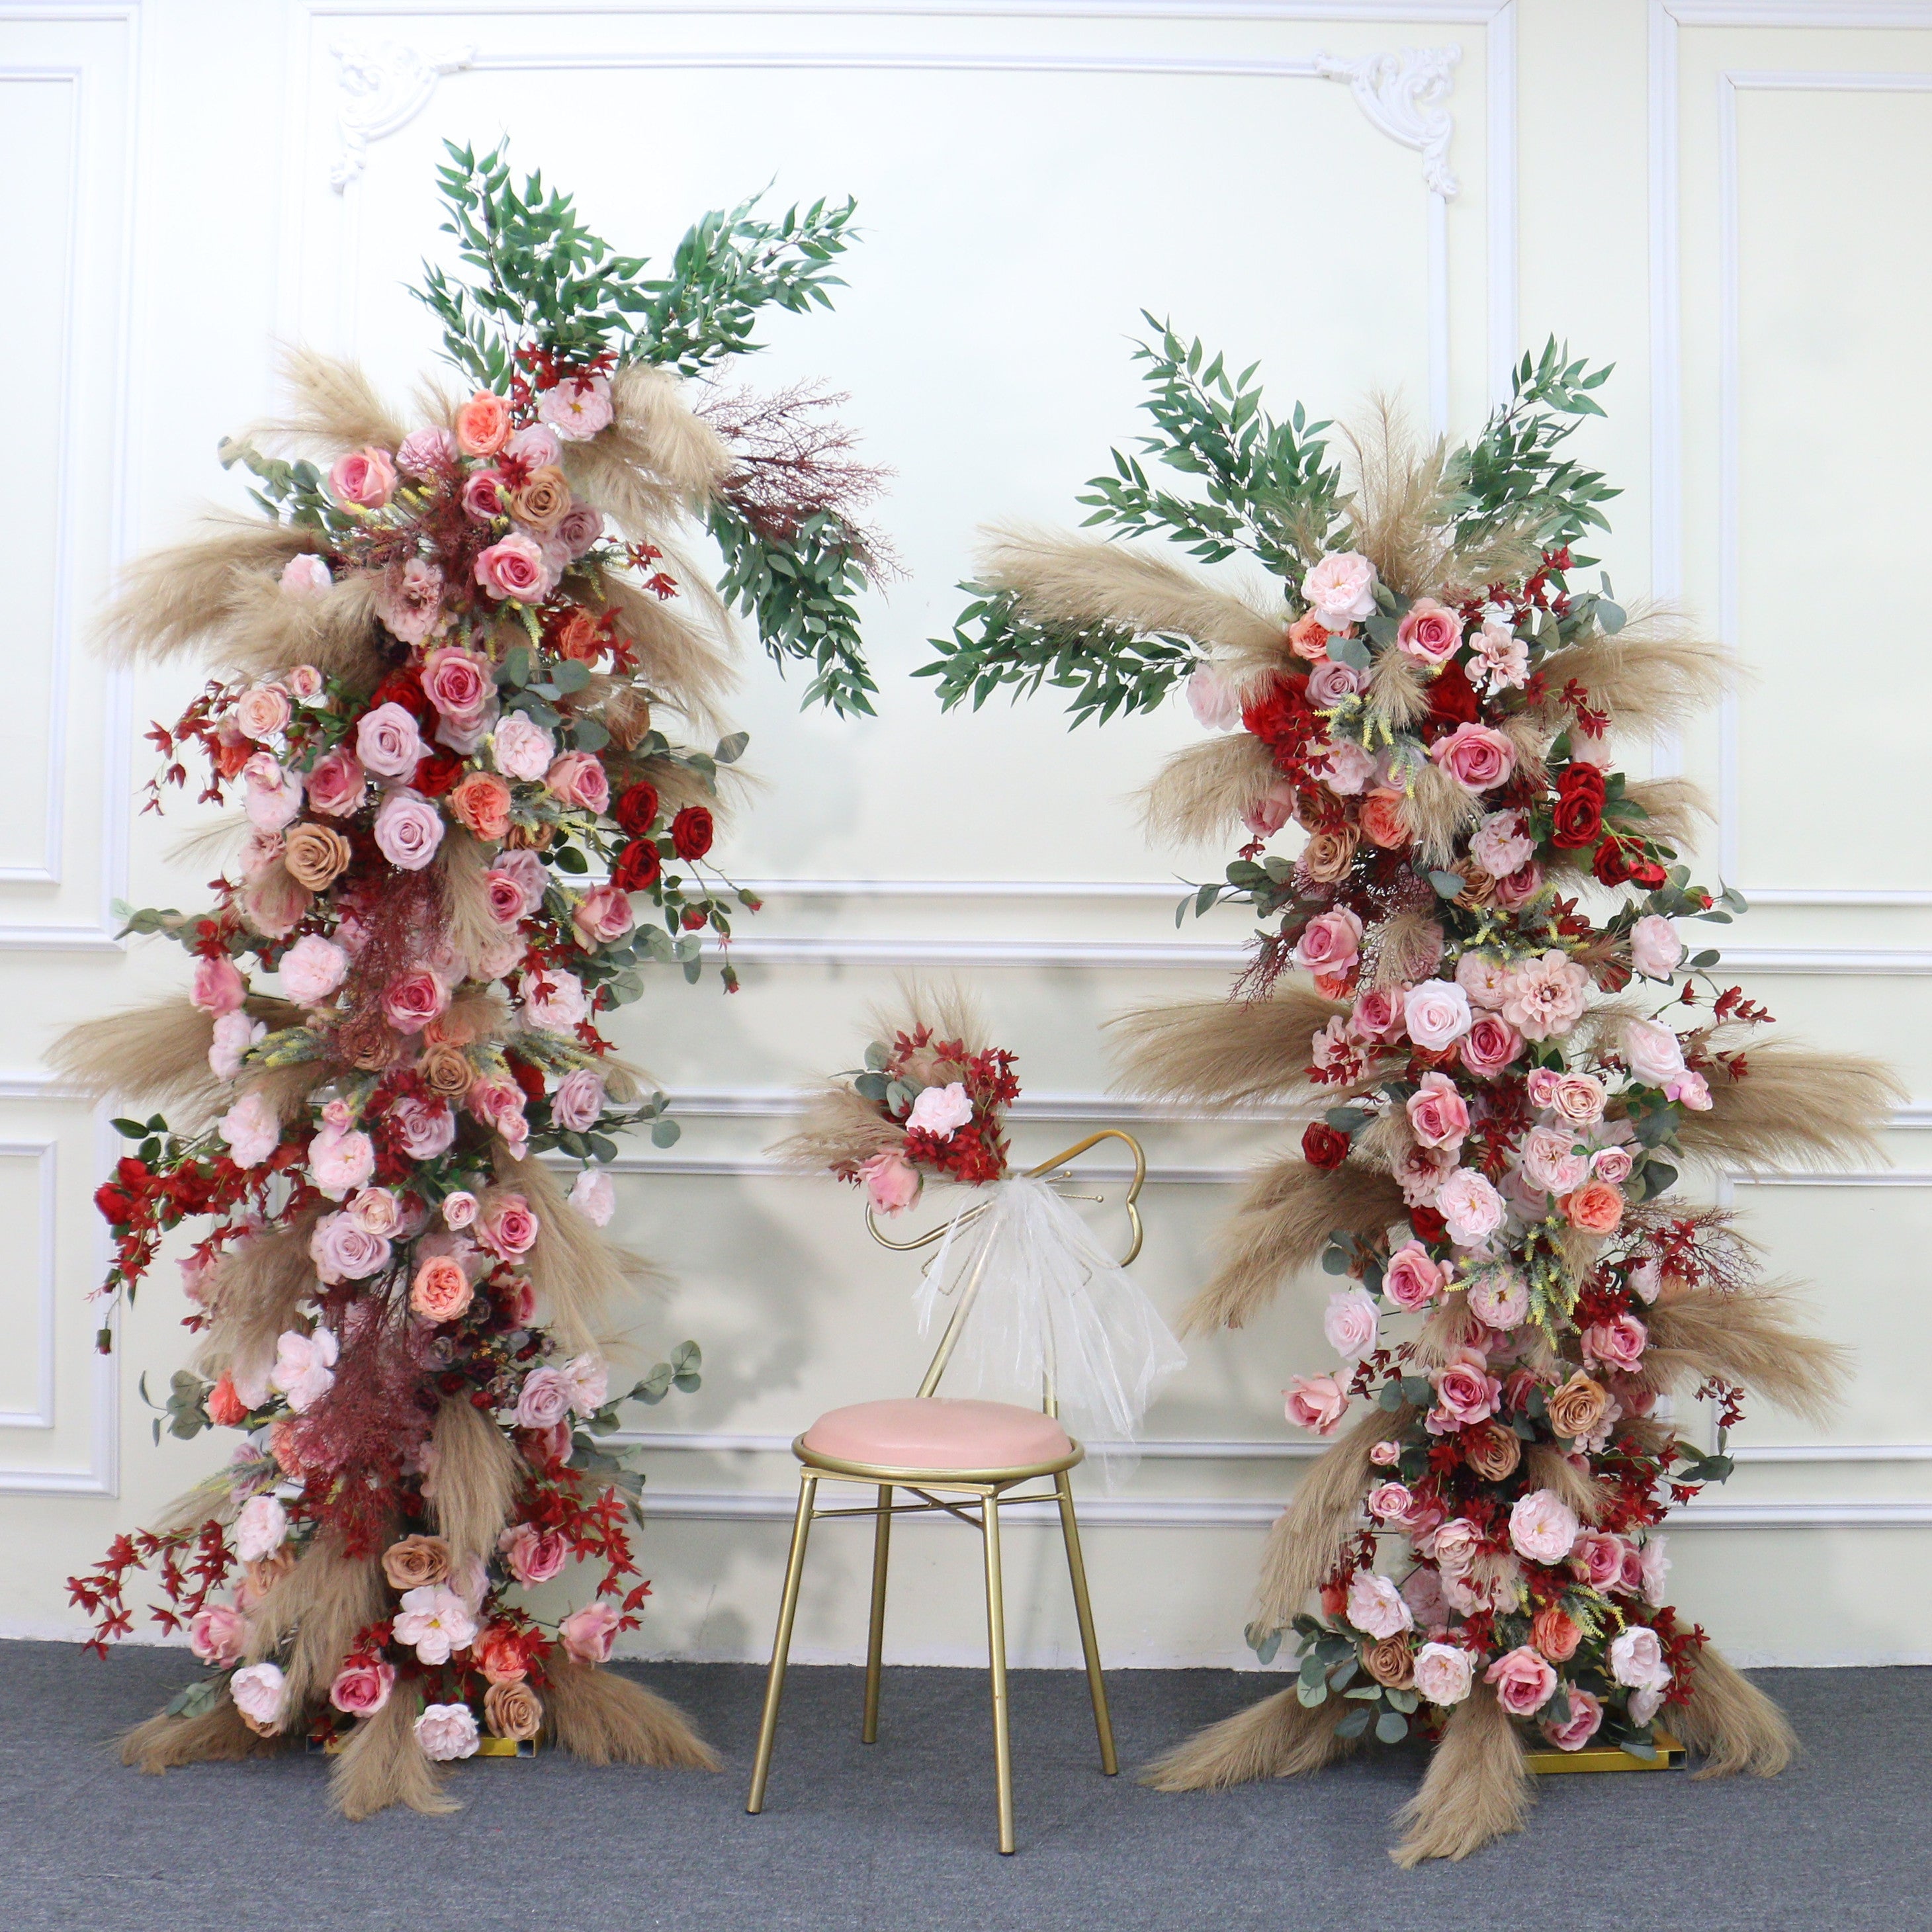 Flowerva Two Way Arch Floral Romantic Wedding Decoration